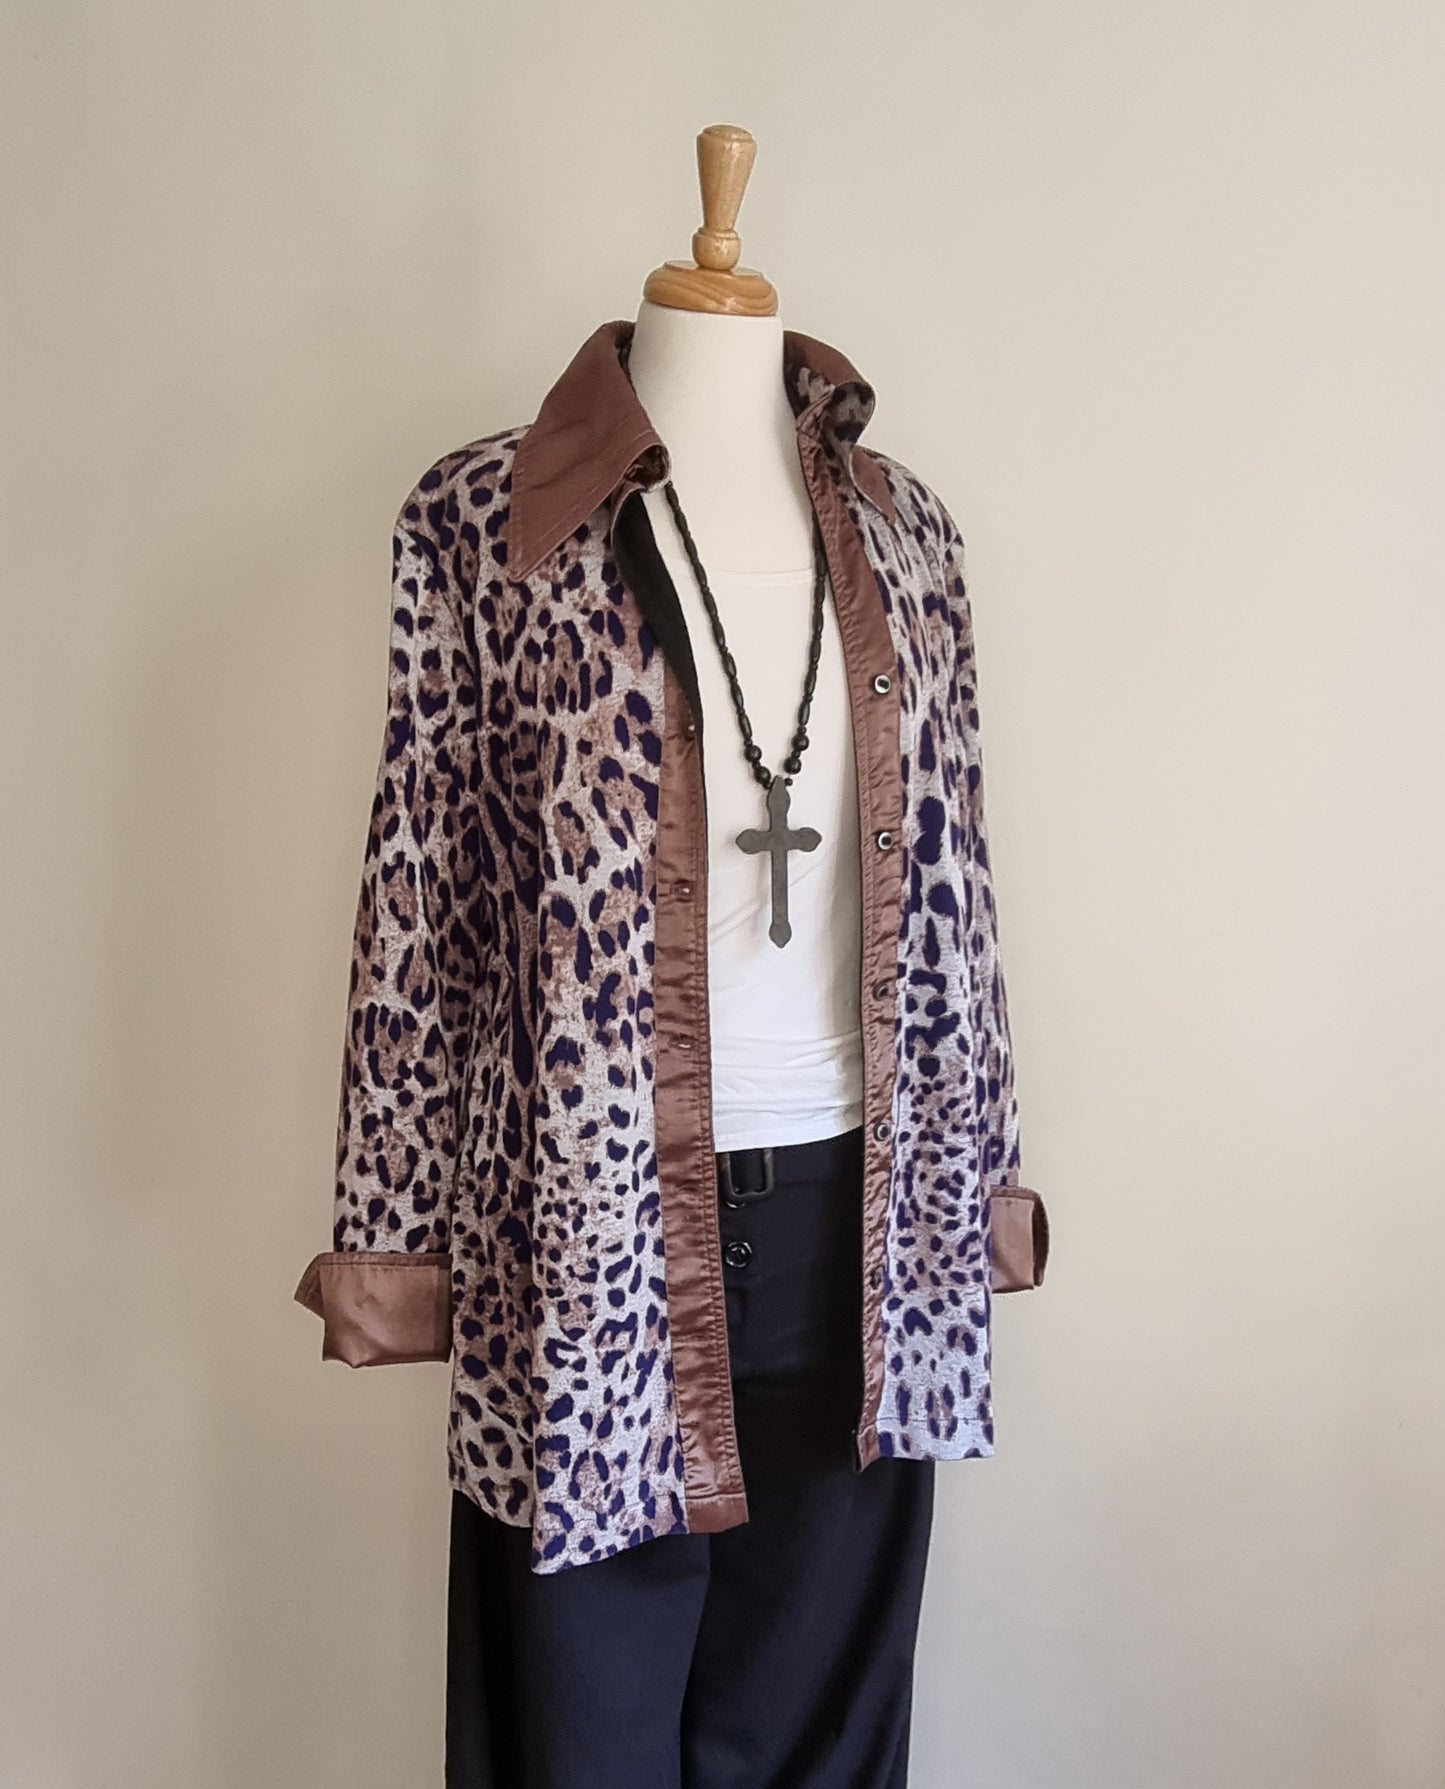 Classic Long sleeve leopard print shirt/jacket with cuff sleeves